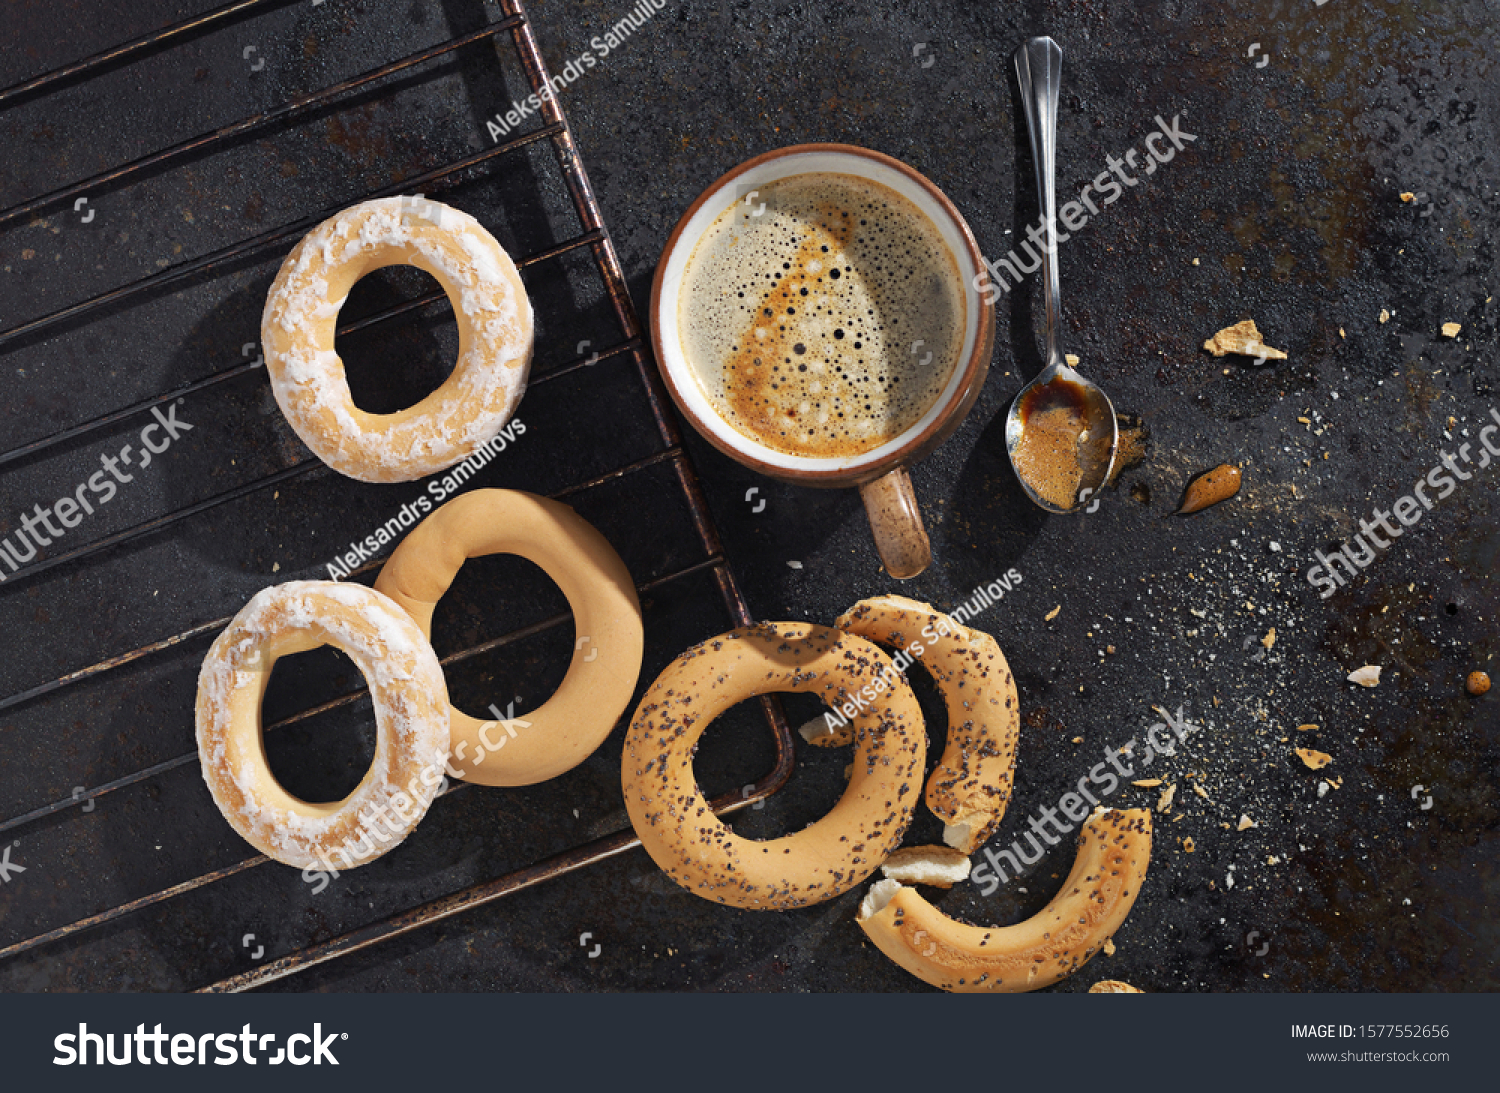 Freshly baked bagels and cup of coffee on a metal baking tray baking tray, top view #1577552656